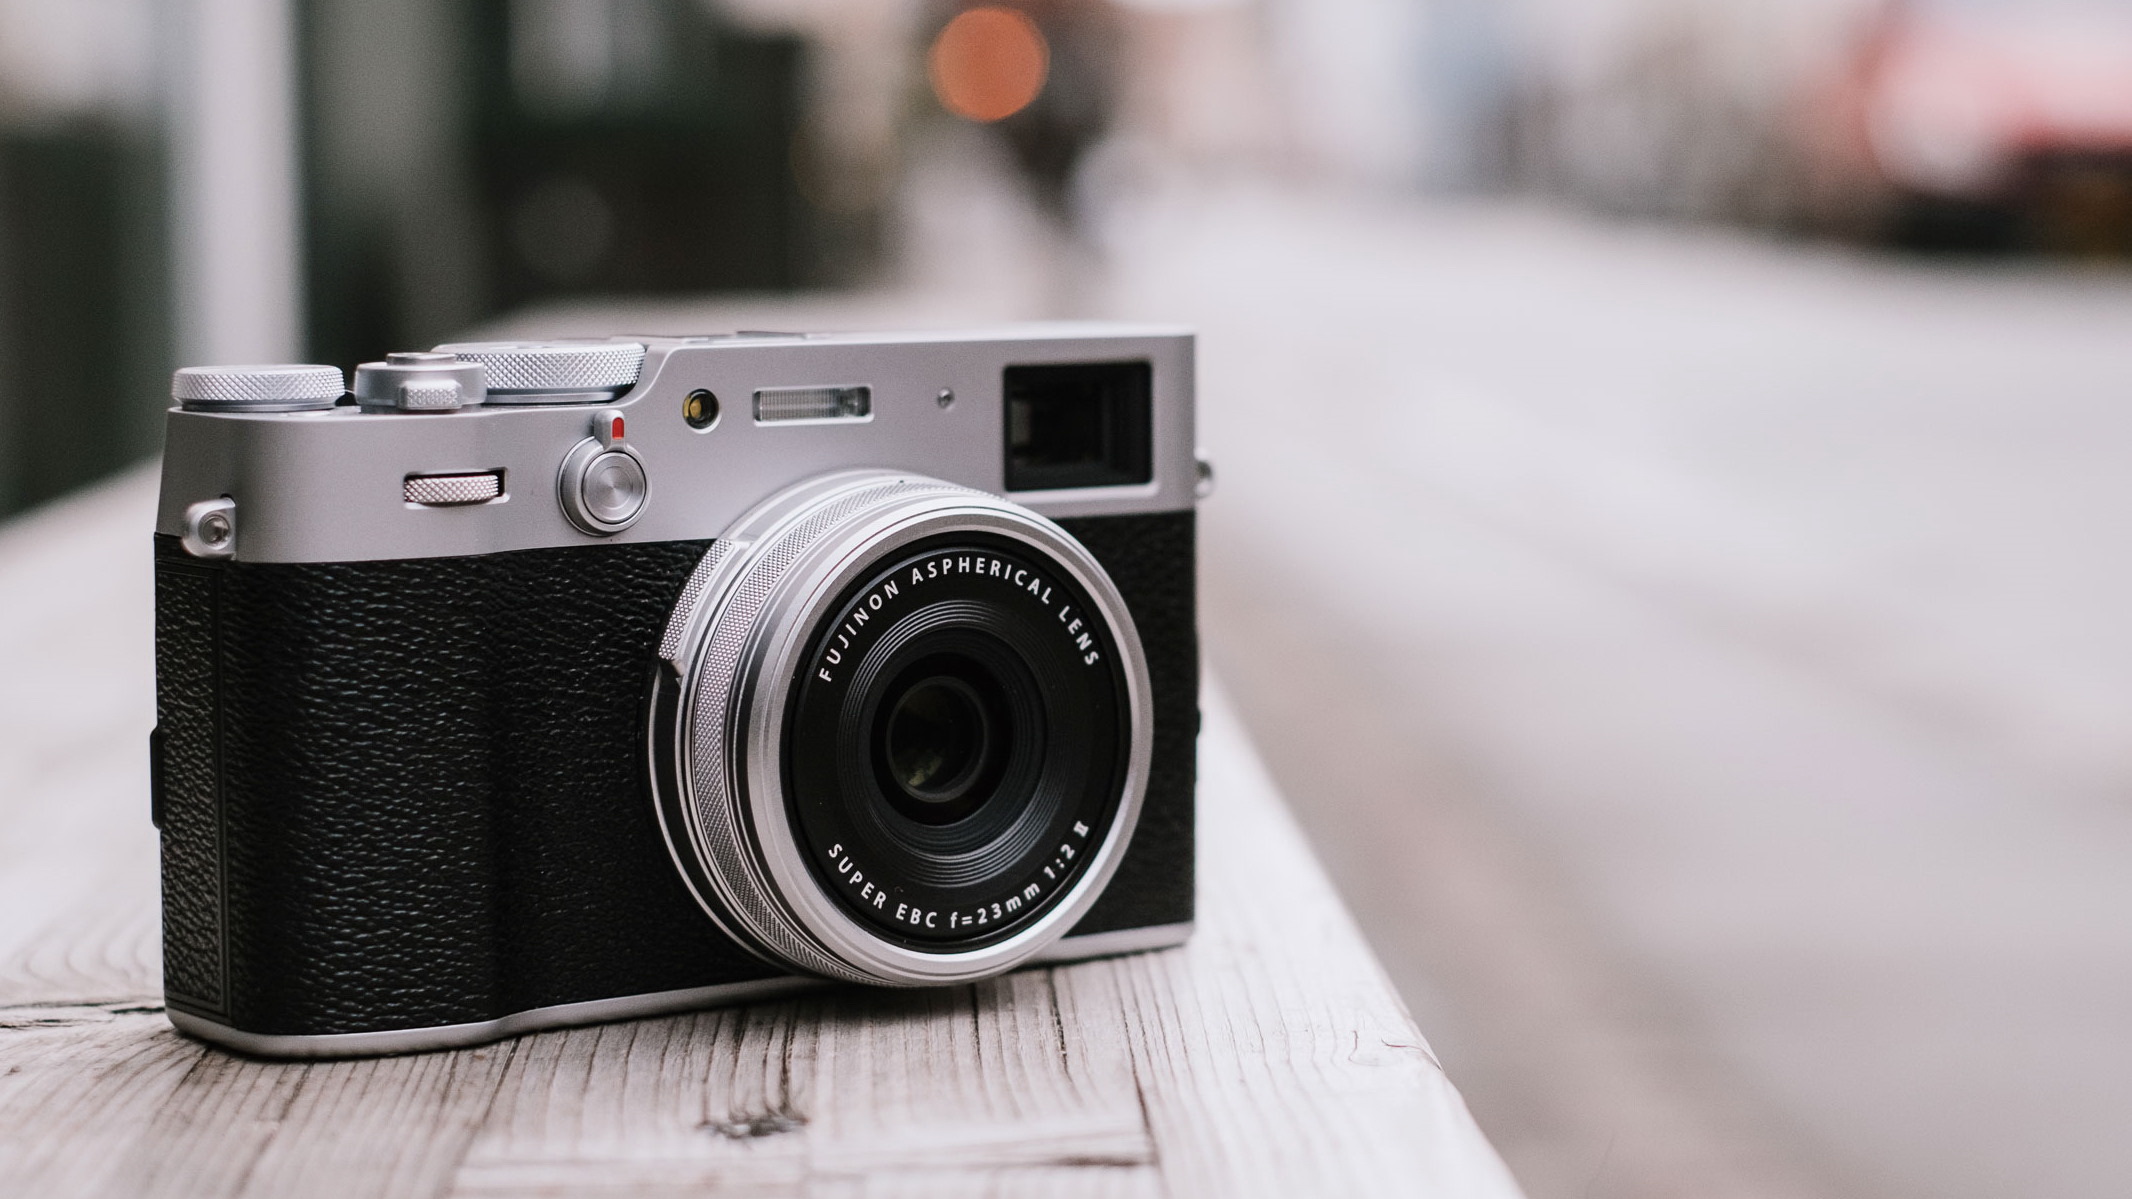 The best compact cameras for street photography in Israel